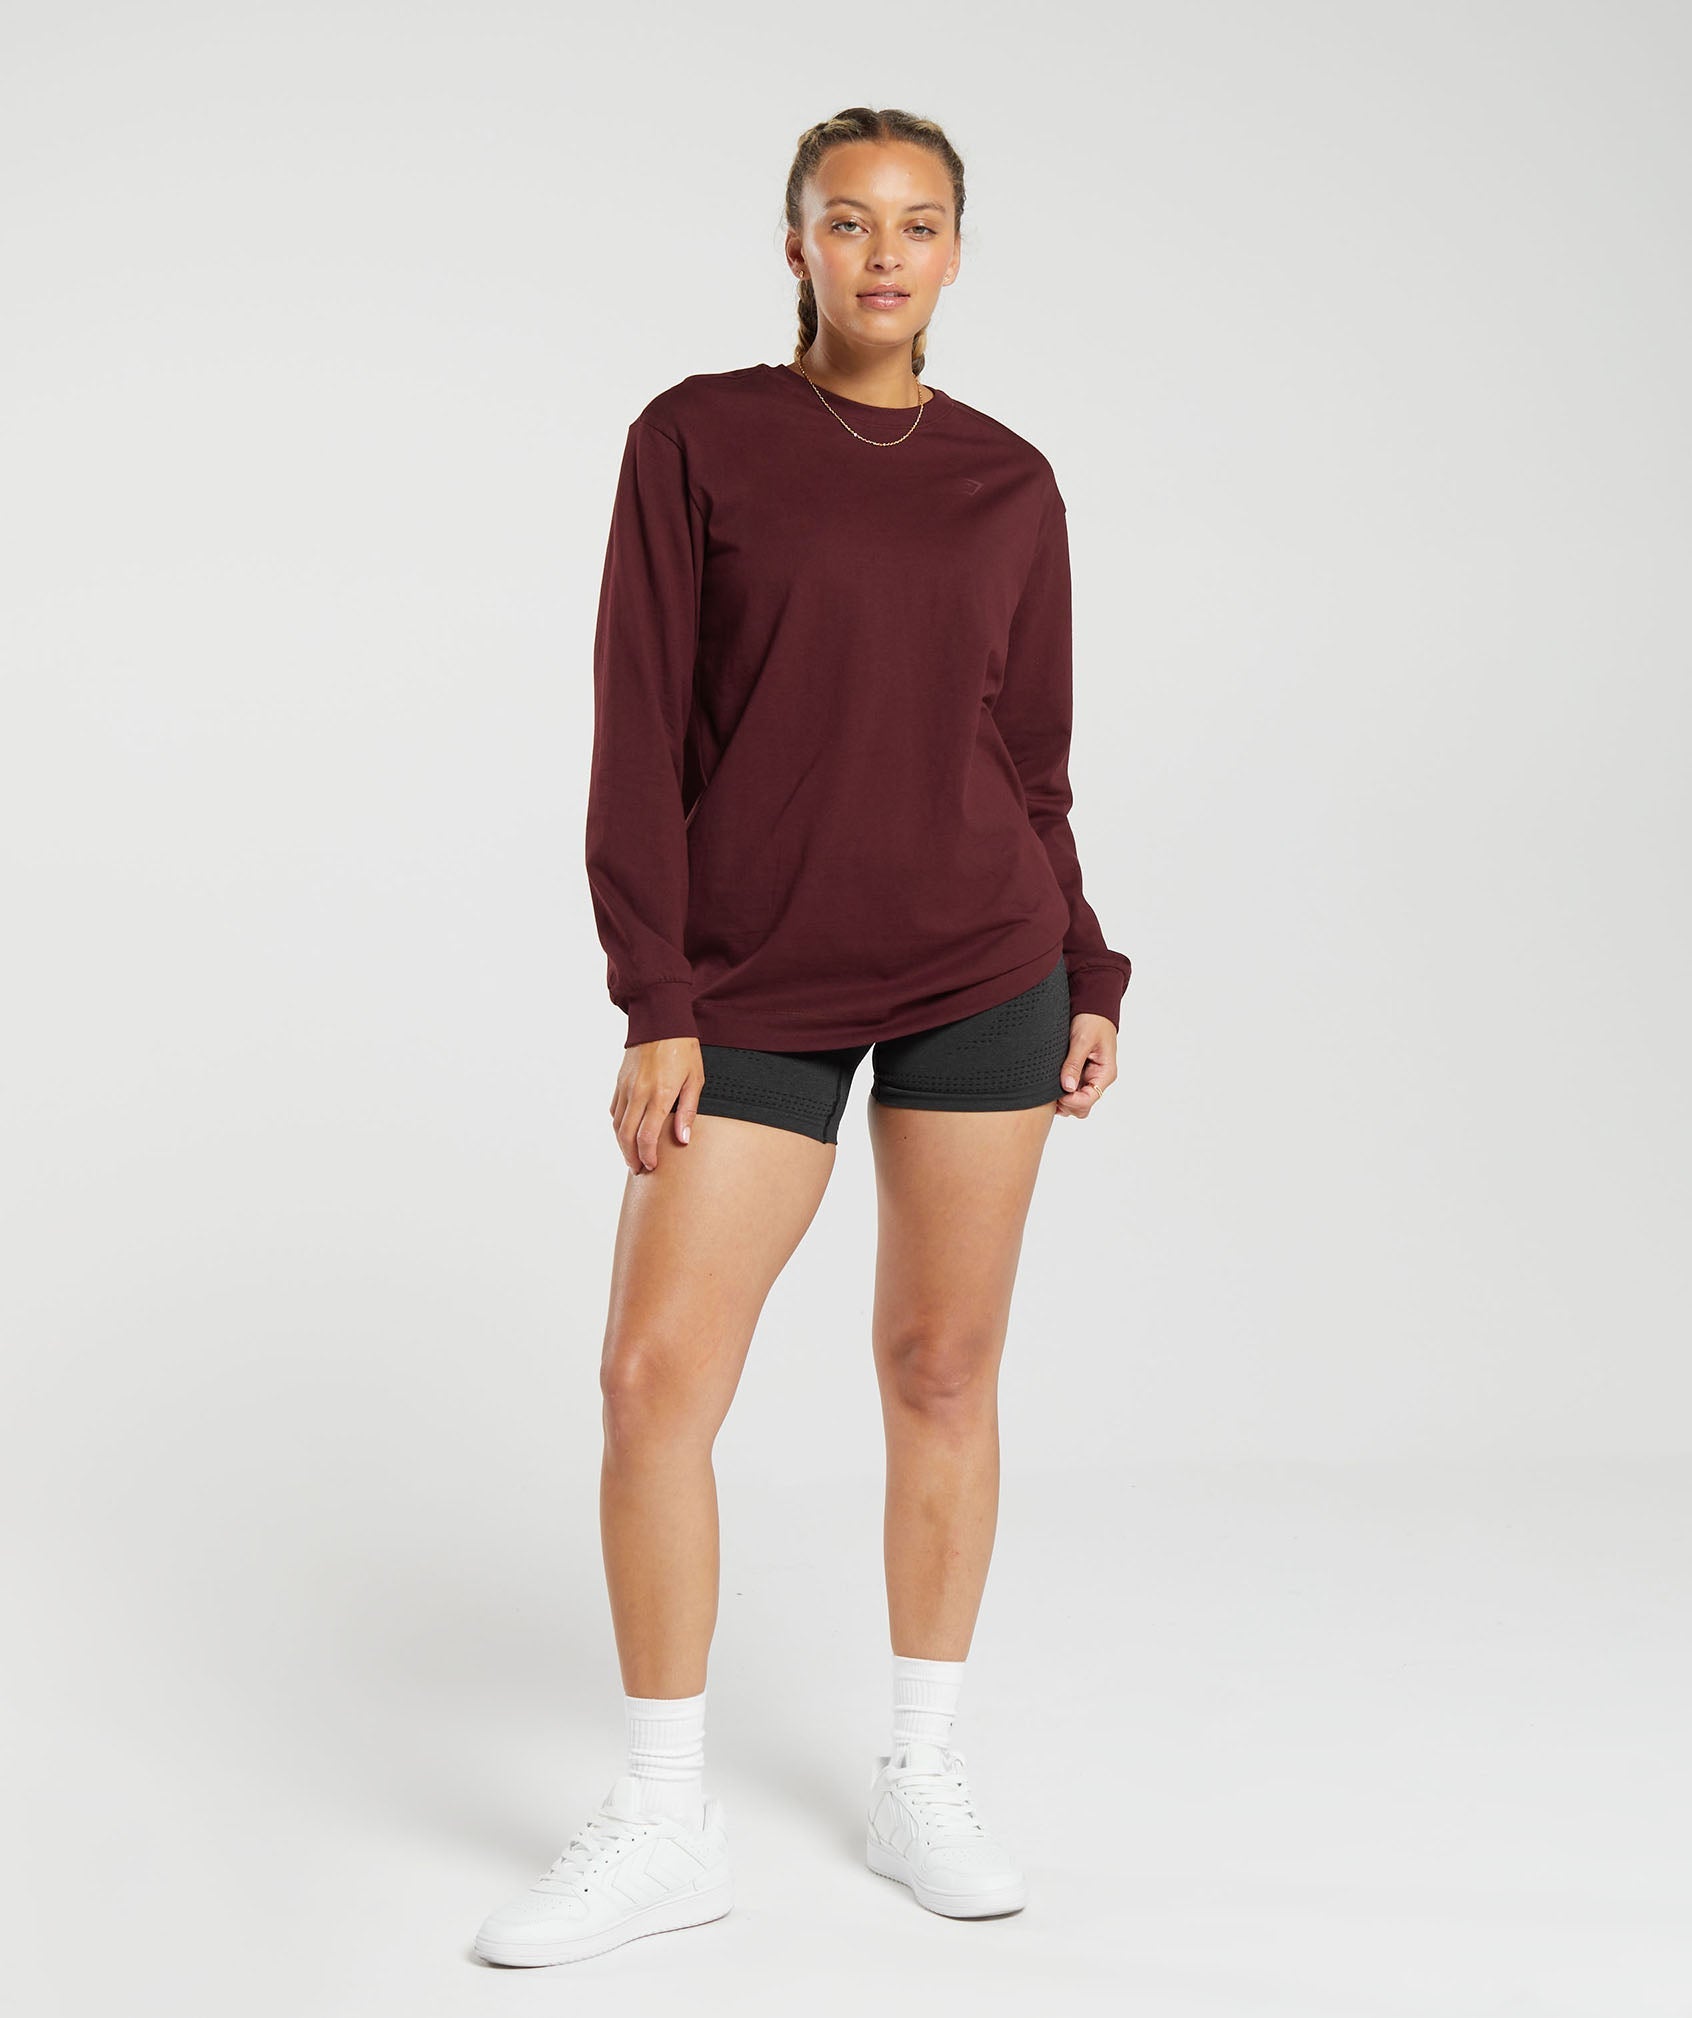 Cotton Oversized Long Sleeve Top in Rich Maroon - view 4